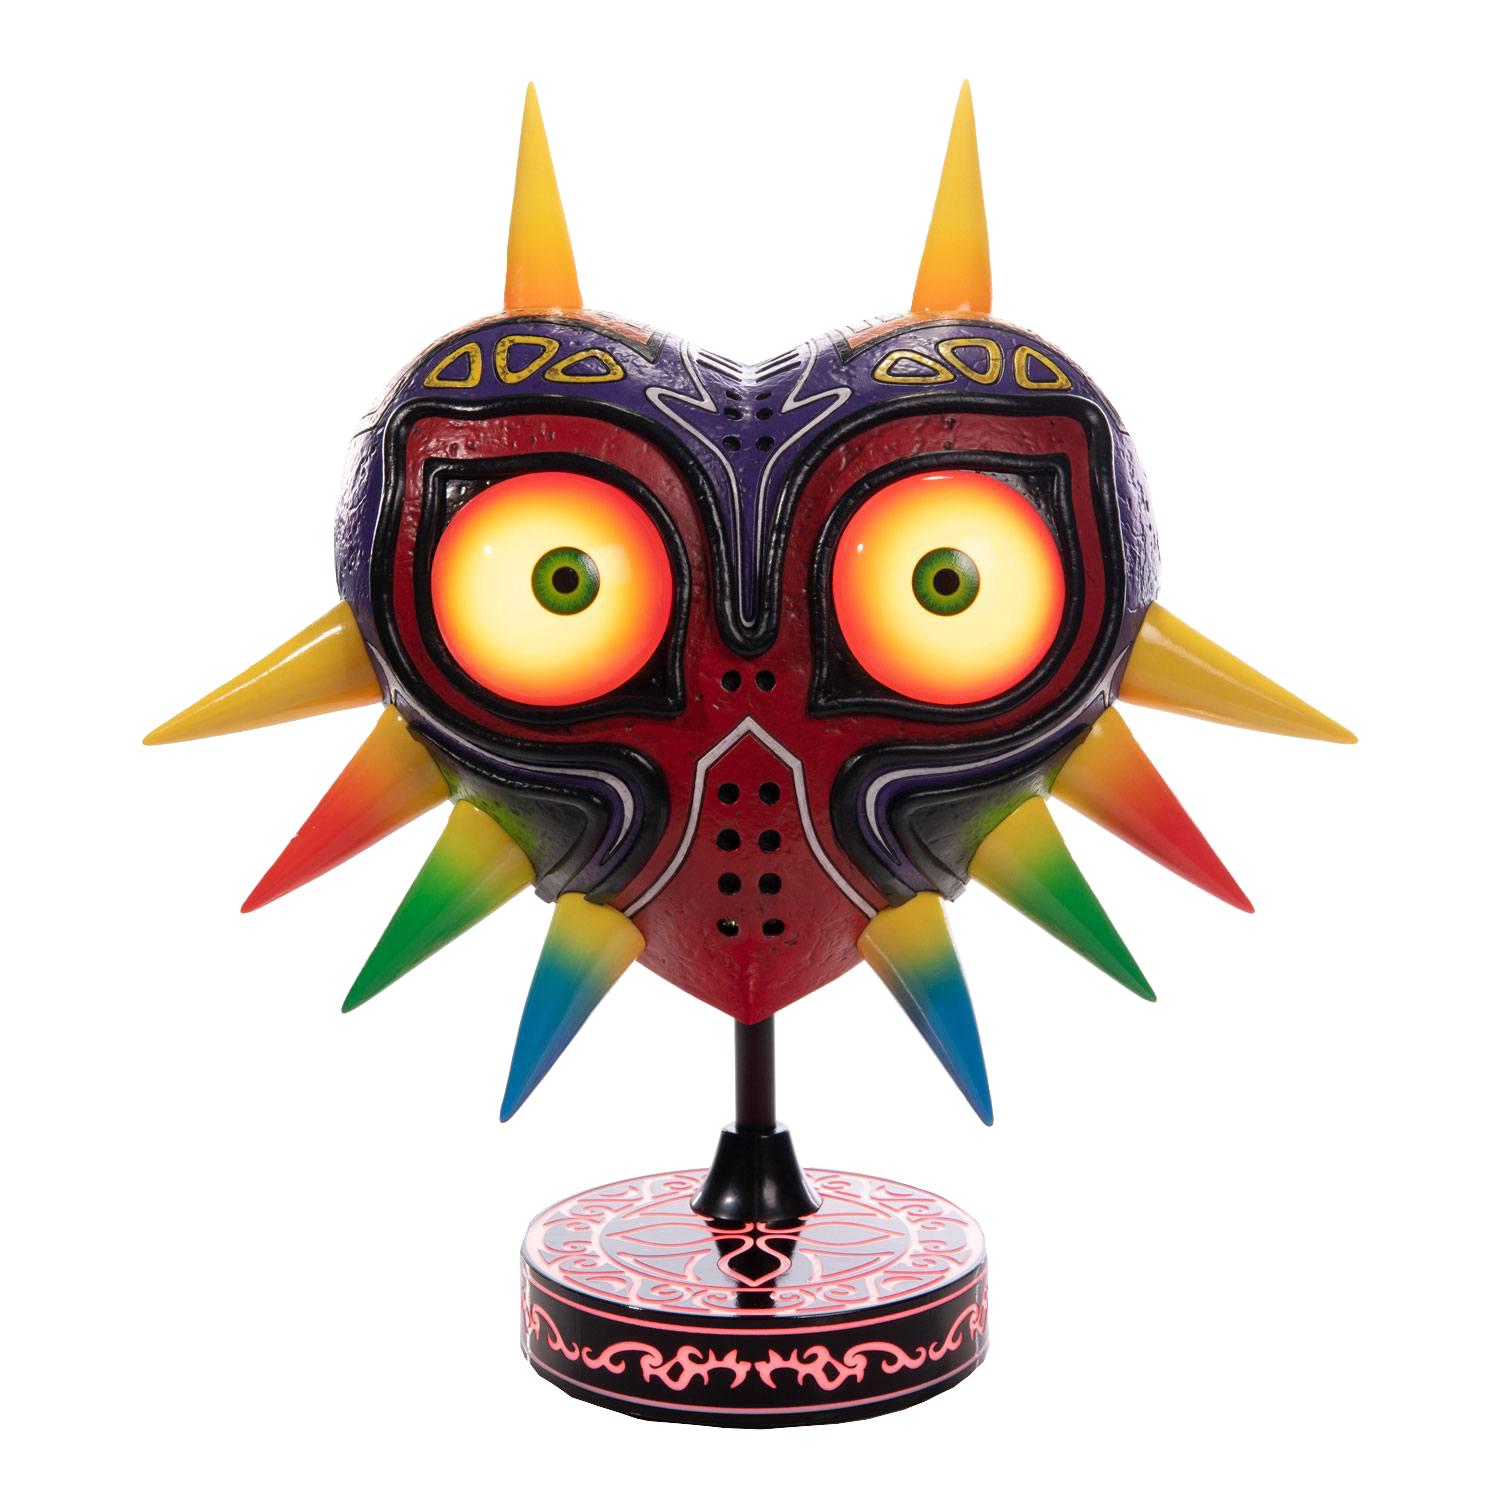 first4figures-the-legend-of-zelda-majora's-mask-collectors-edition-pvc-statue-toyslife